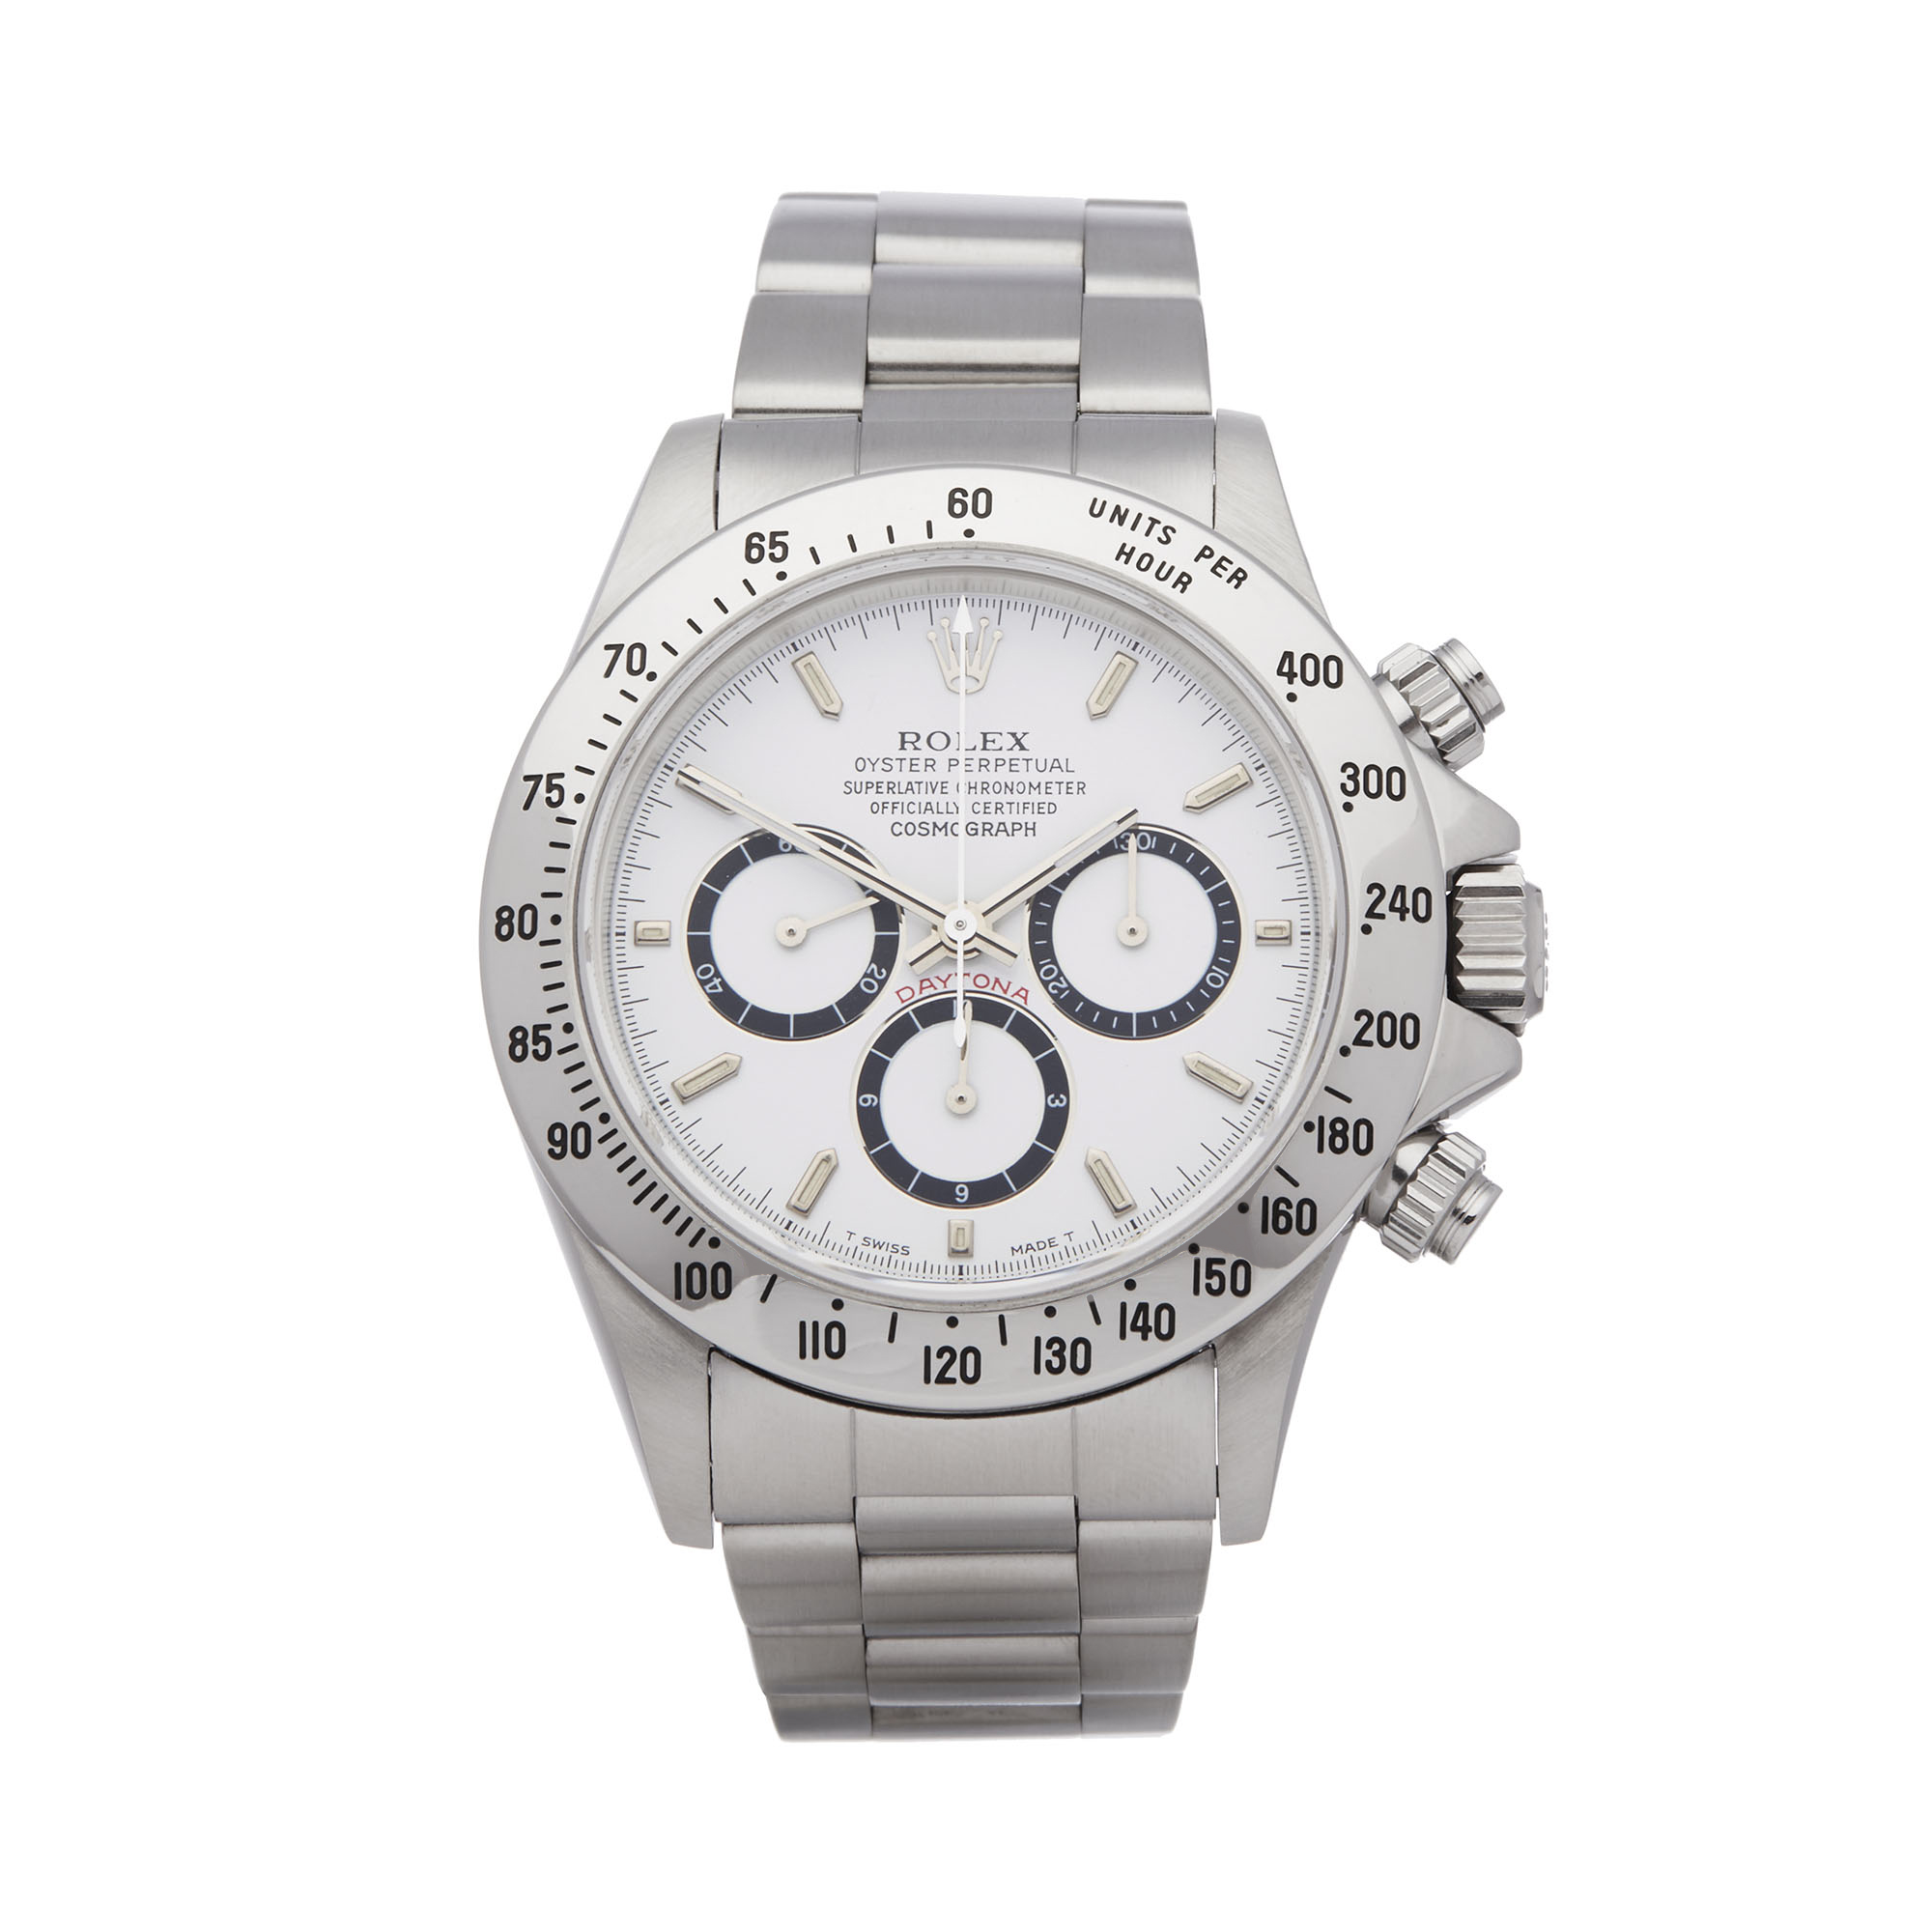 1991 Rolex Daytona Zenith Inverted 6 Chronograph Stainless Steel - 16520 - Image 9 of 9